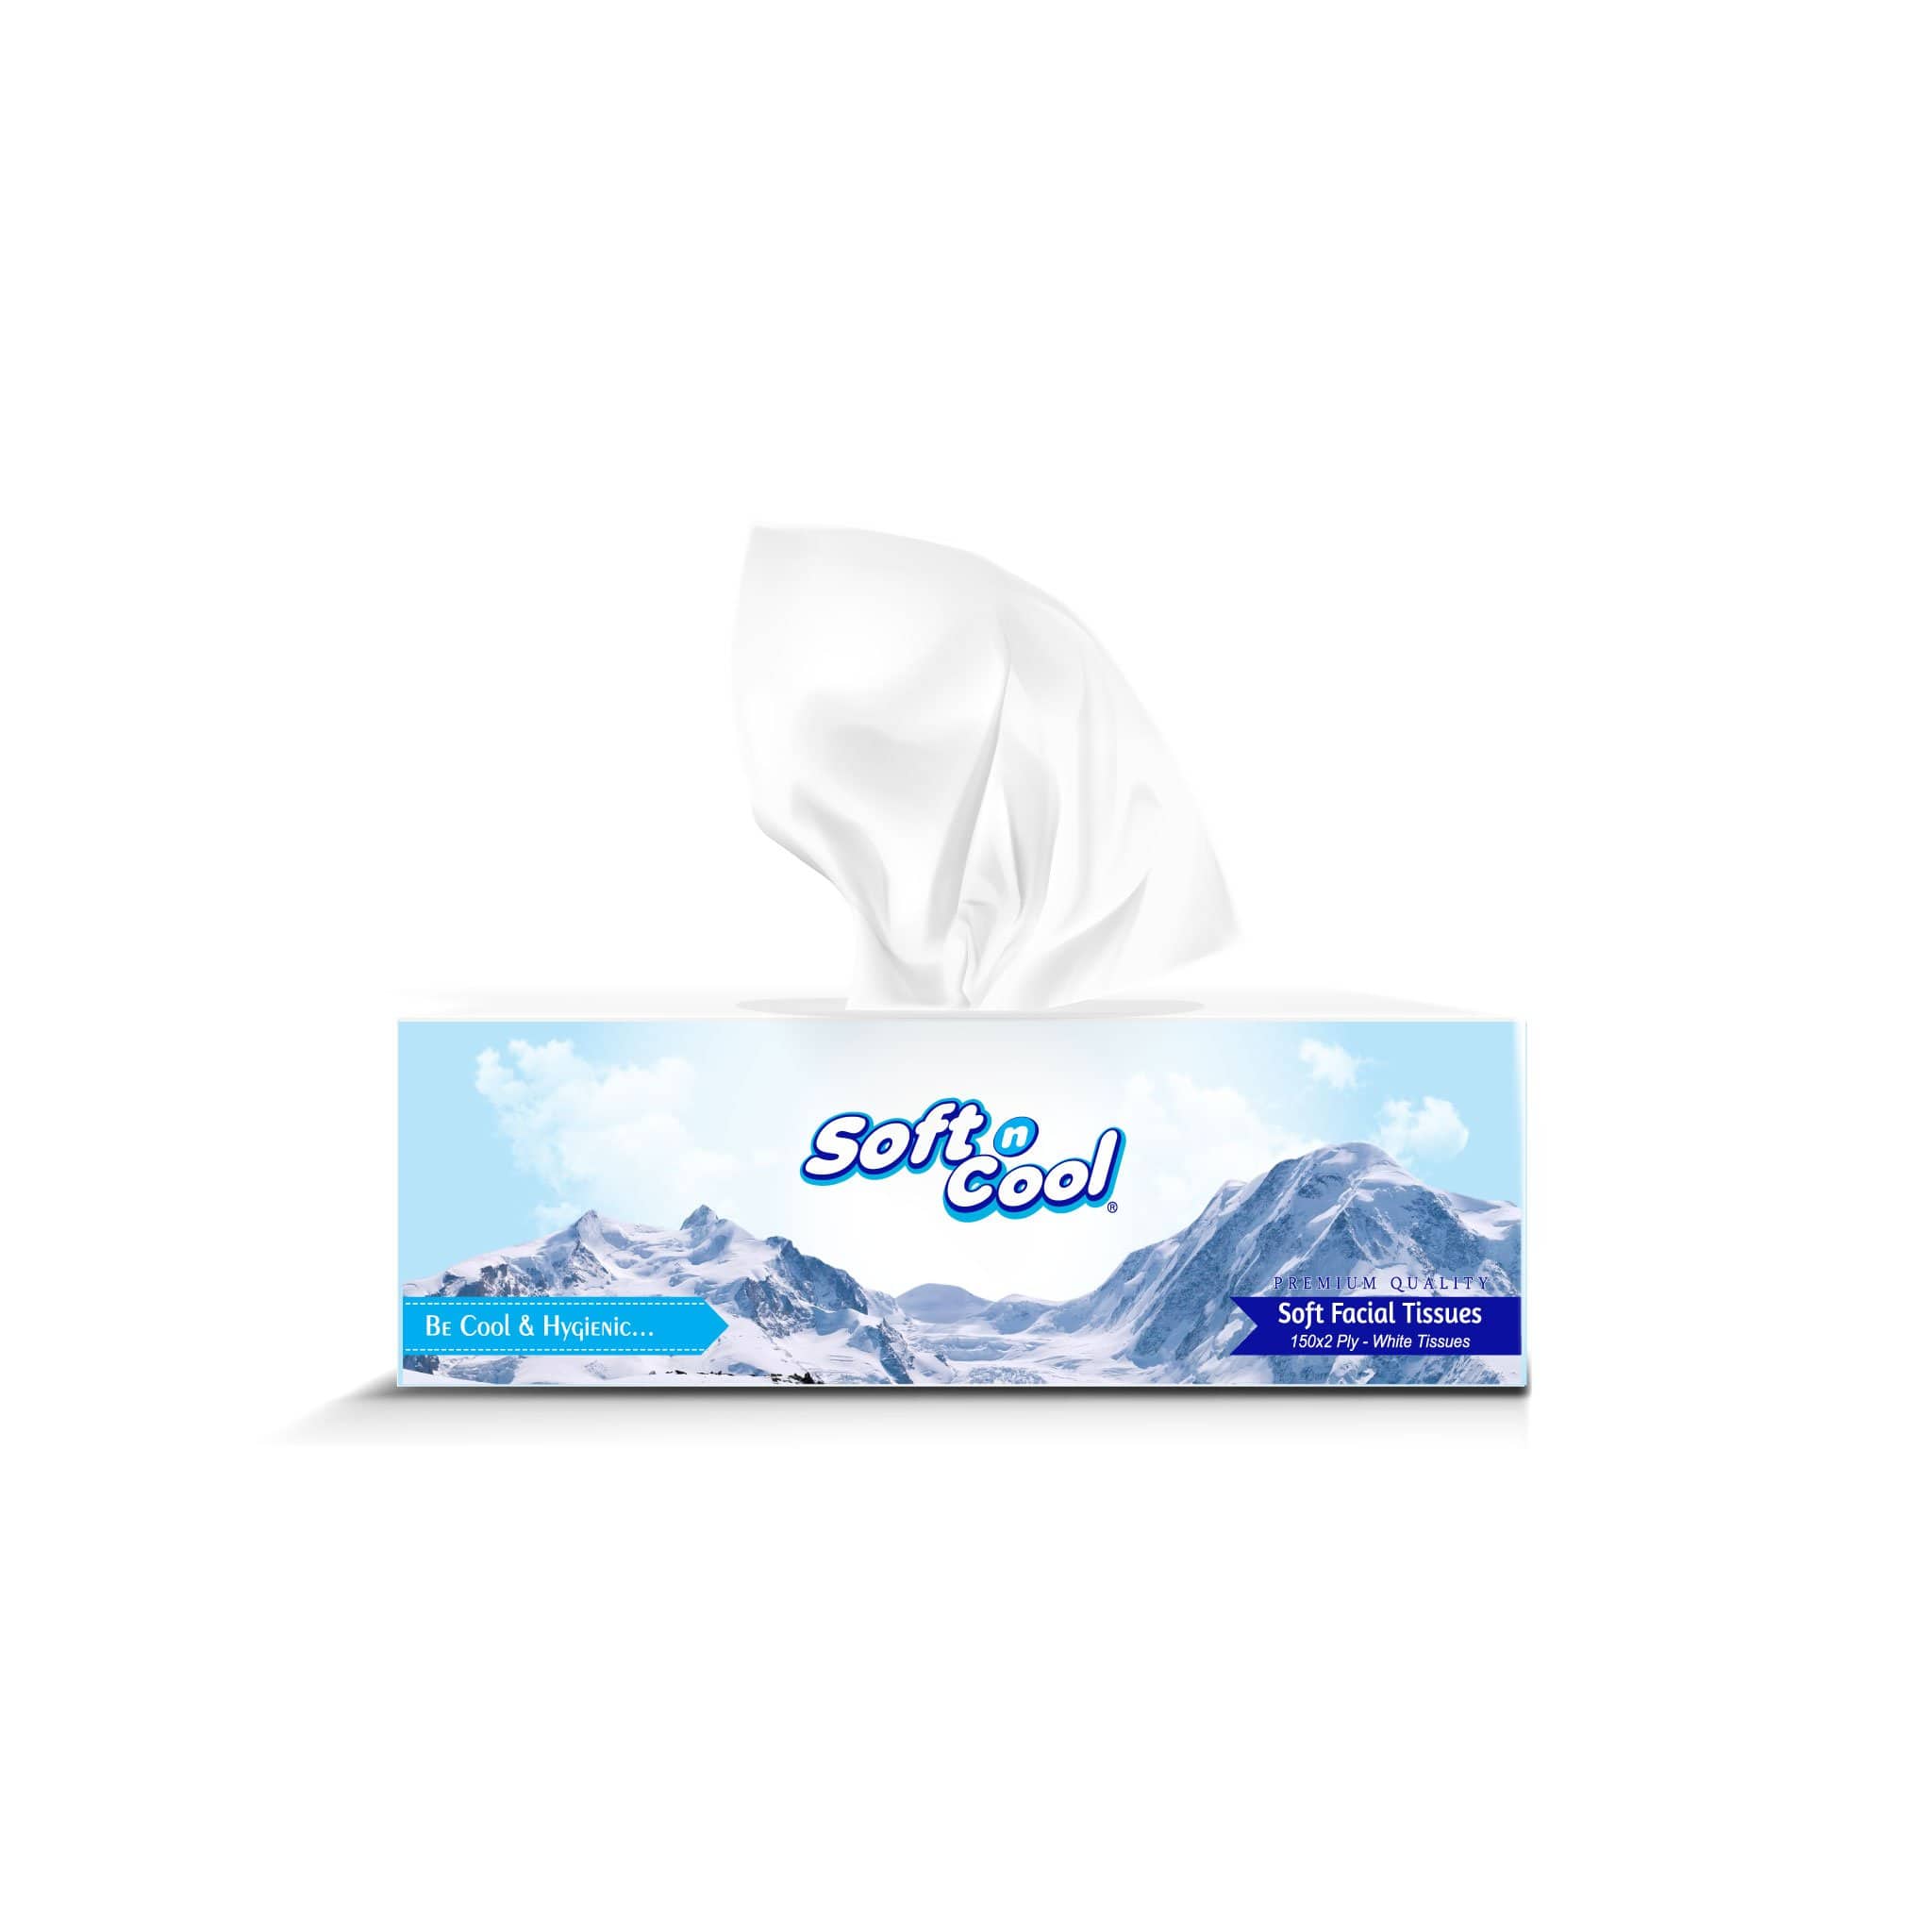 Soft n Cool Facial Tissue 150 Sheets x 2 Ply Wholesale Offer Pack 36 Boxes - Hotpack Global